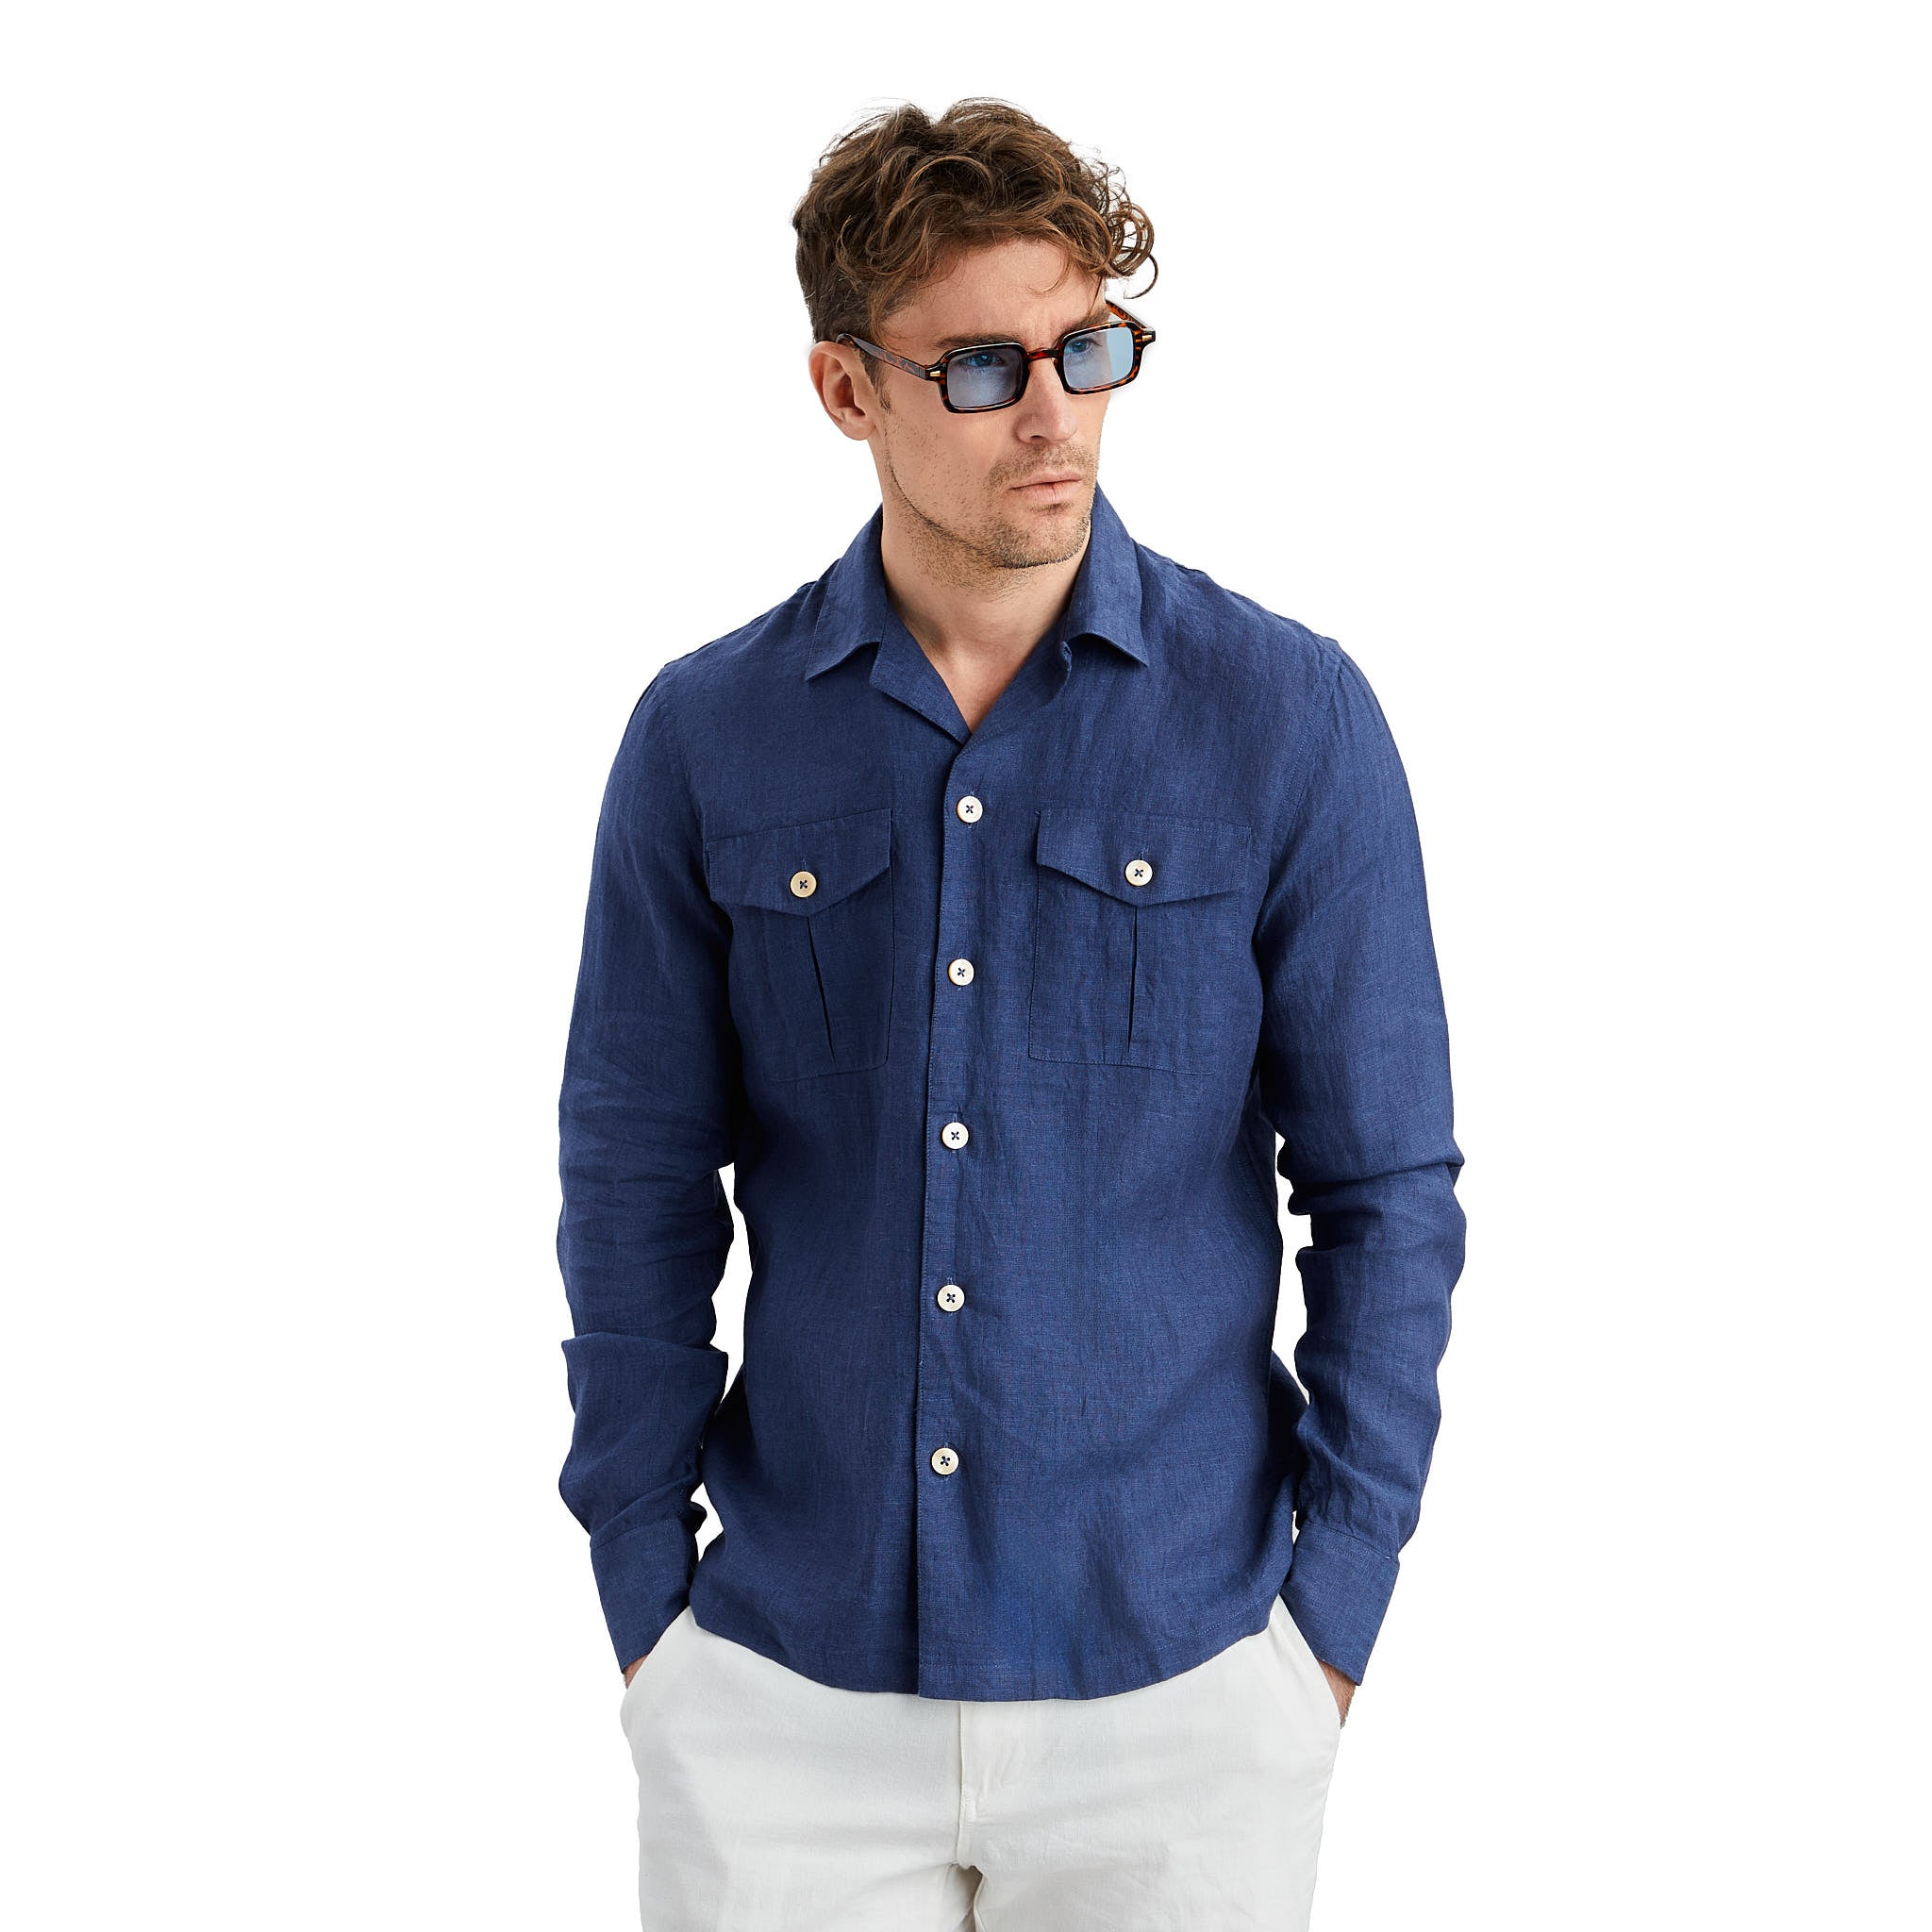 Navy Linen Shirt with pockets